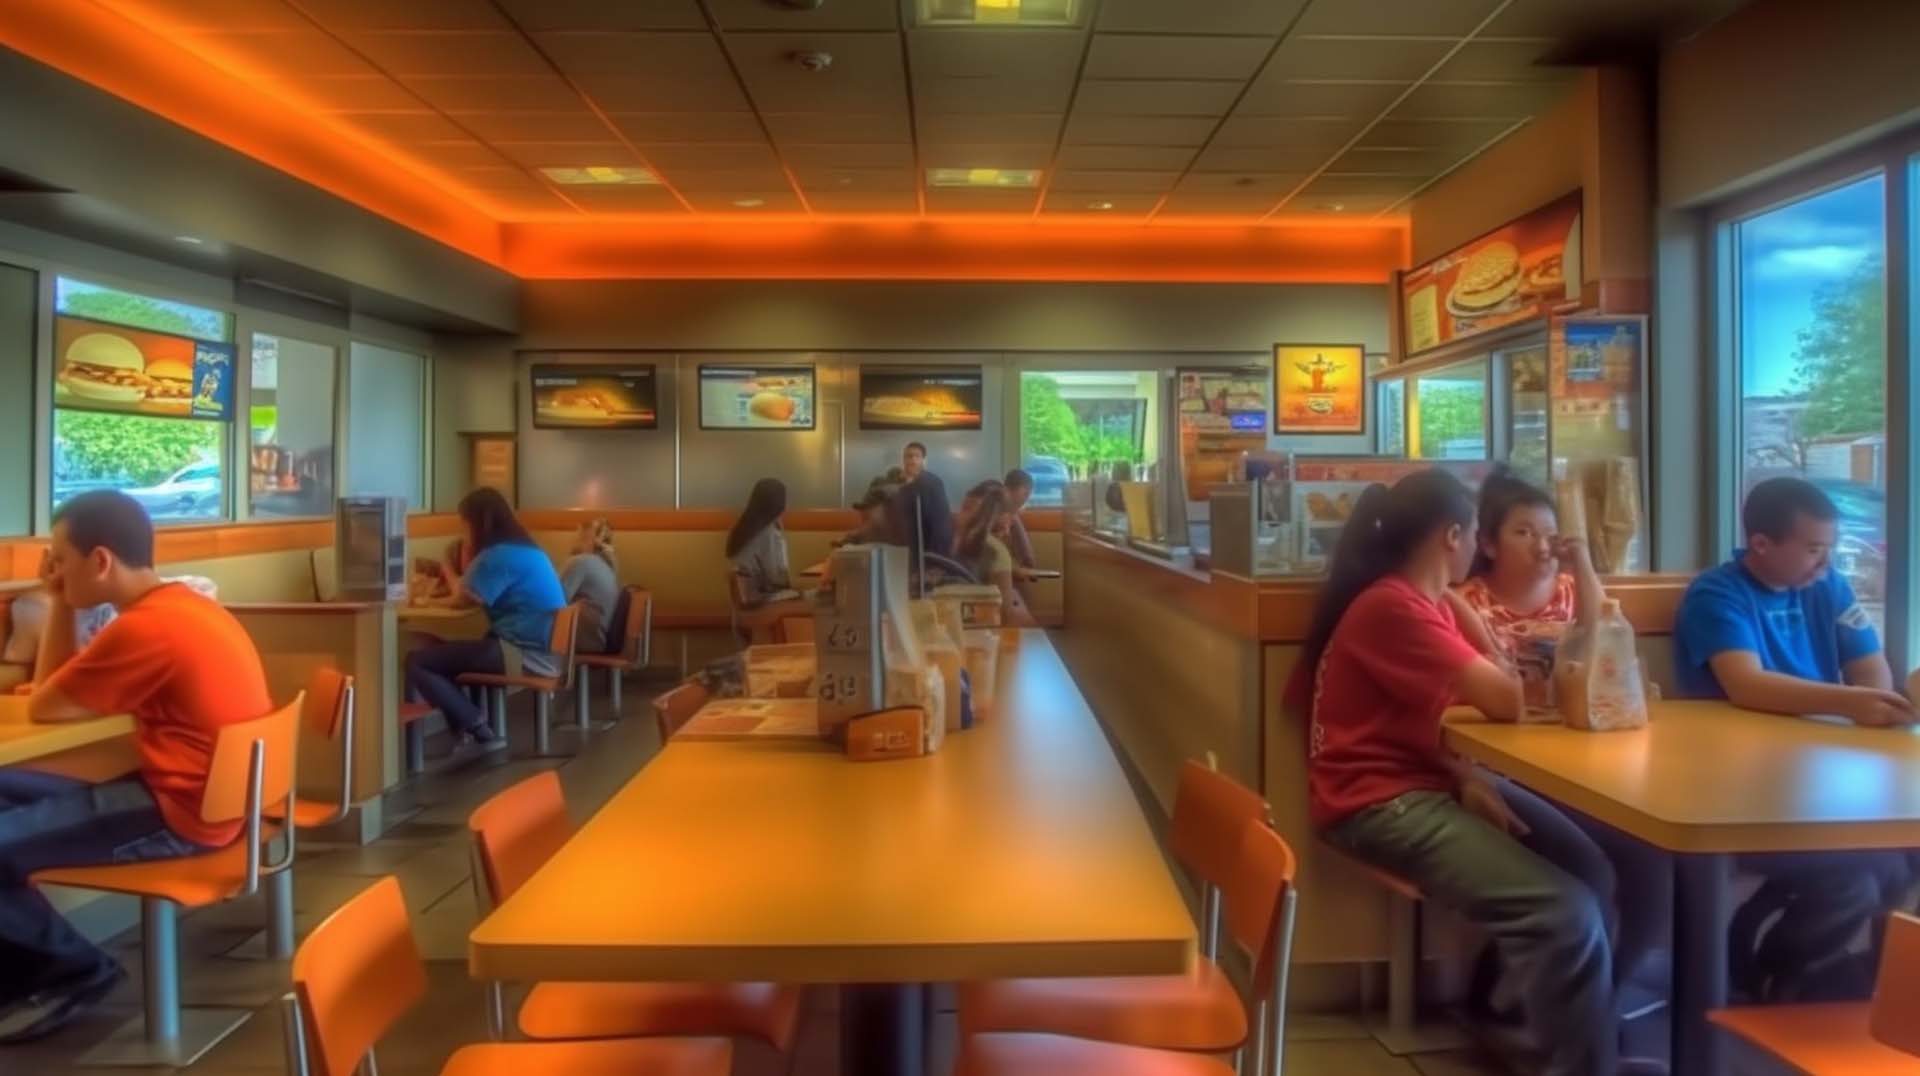 Biloxi has a wide variety of delicious fast food options to choose from.